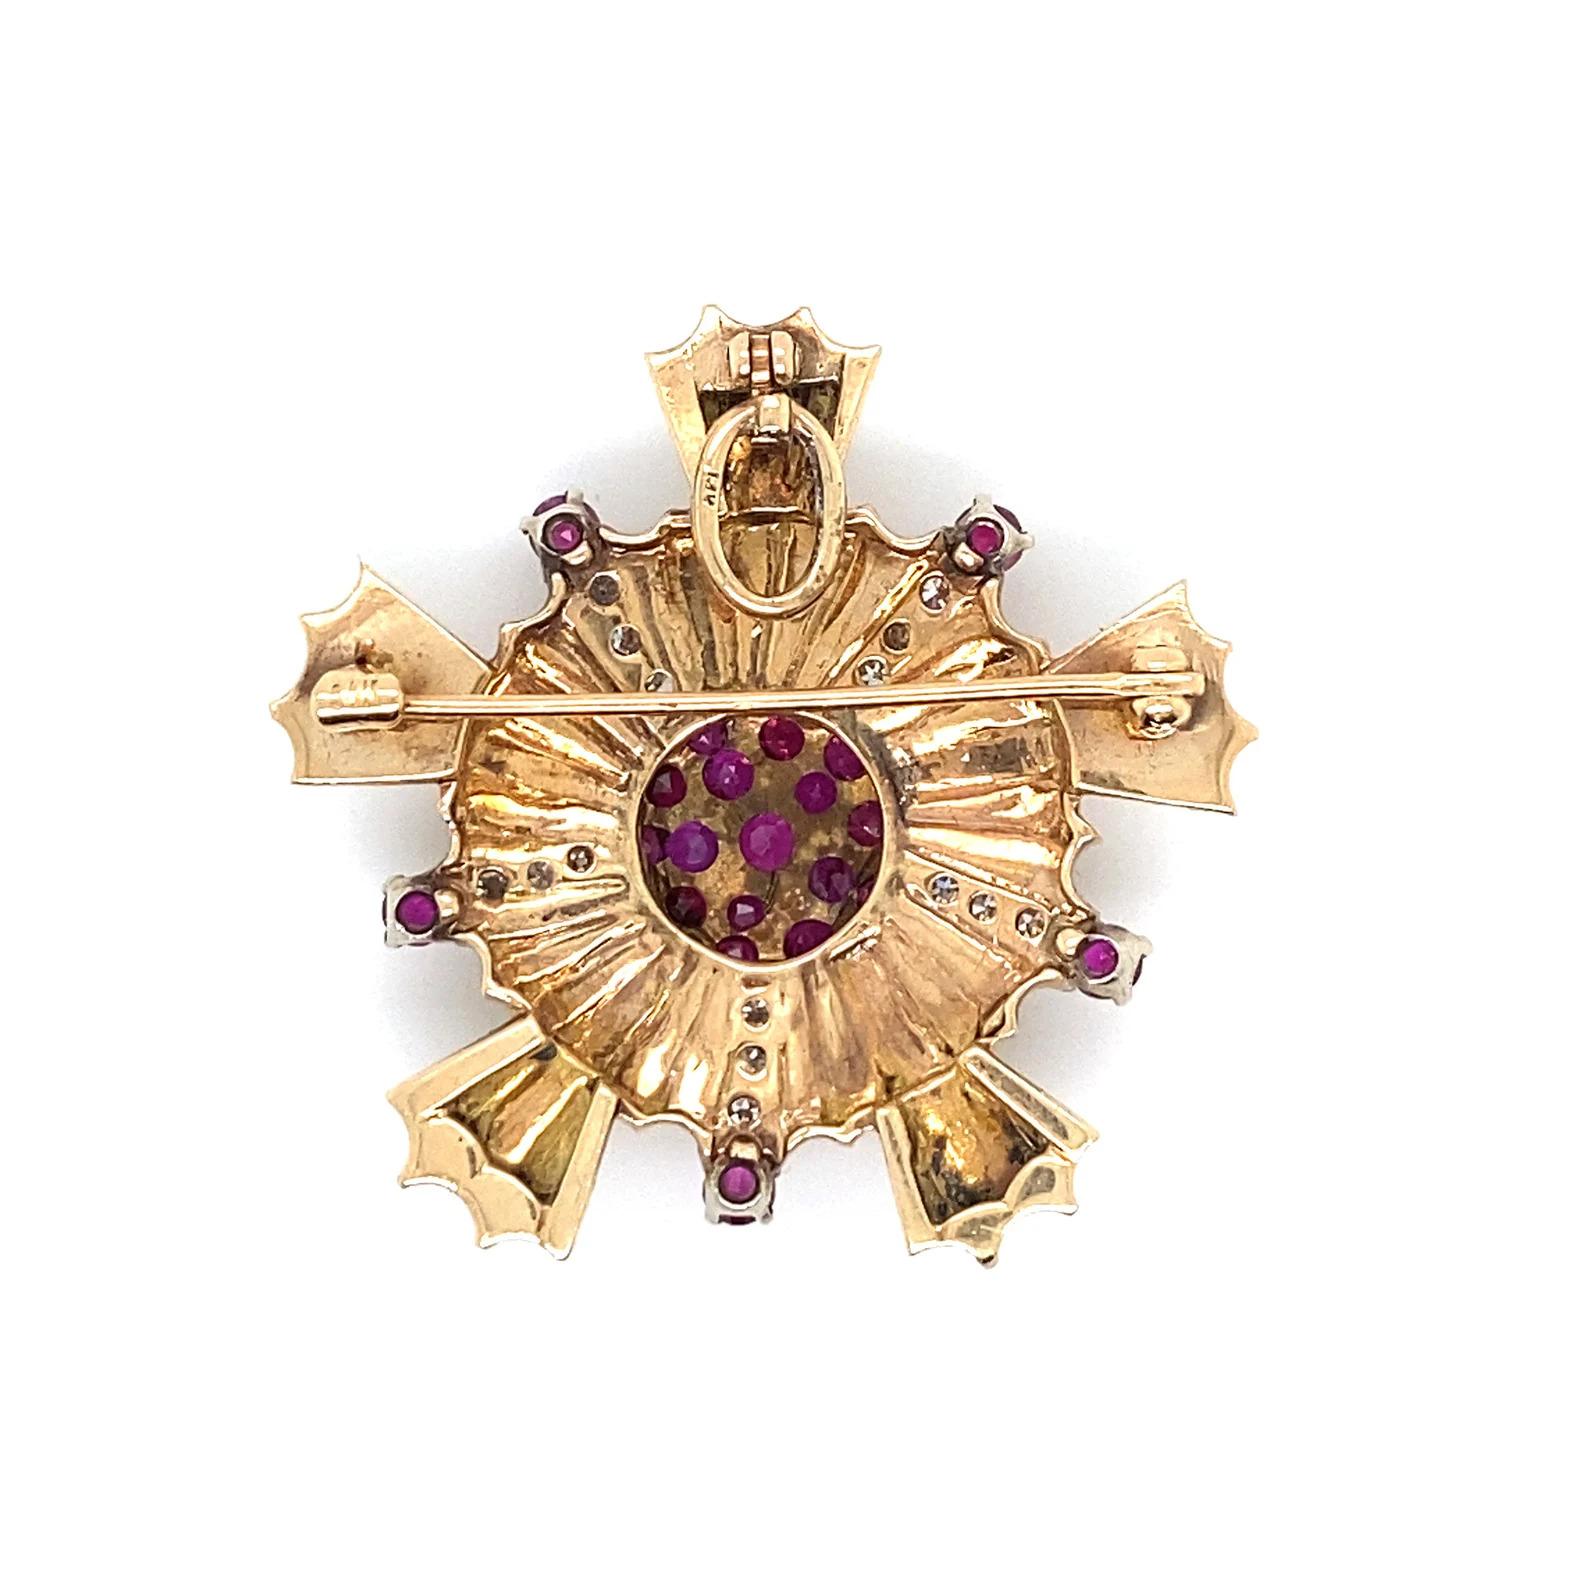 1.65 Total Carat Vintage Ruby and Diamond 14K Yellow Gold Convertible Pendant Brooch

This vintage pin has been inspected by our jewelers for authenticity and quality. 
It is in ready to wear condition. It is crafted in 14K Yellow Gold, with Rubies